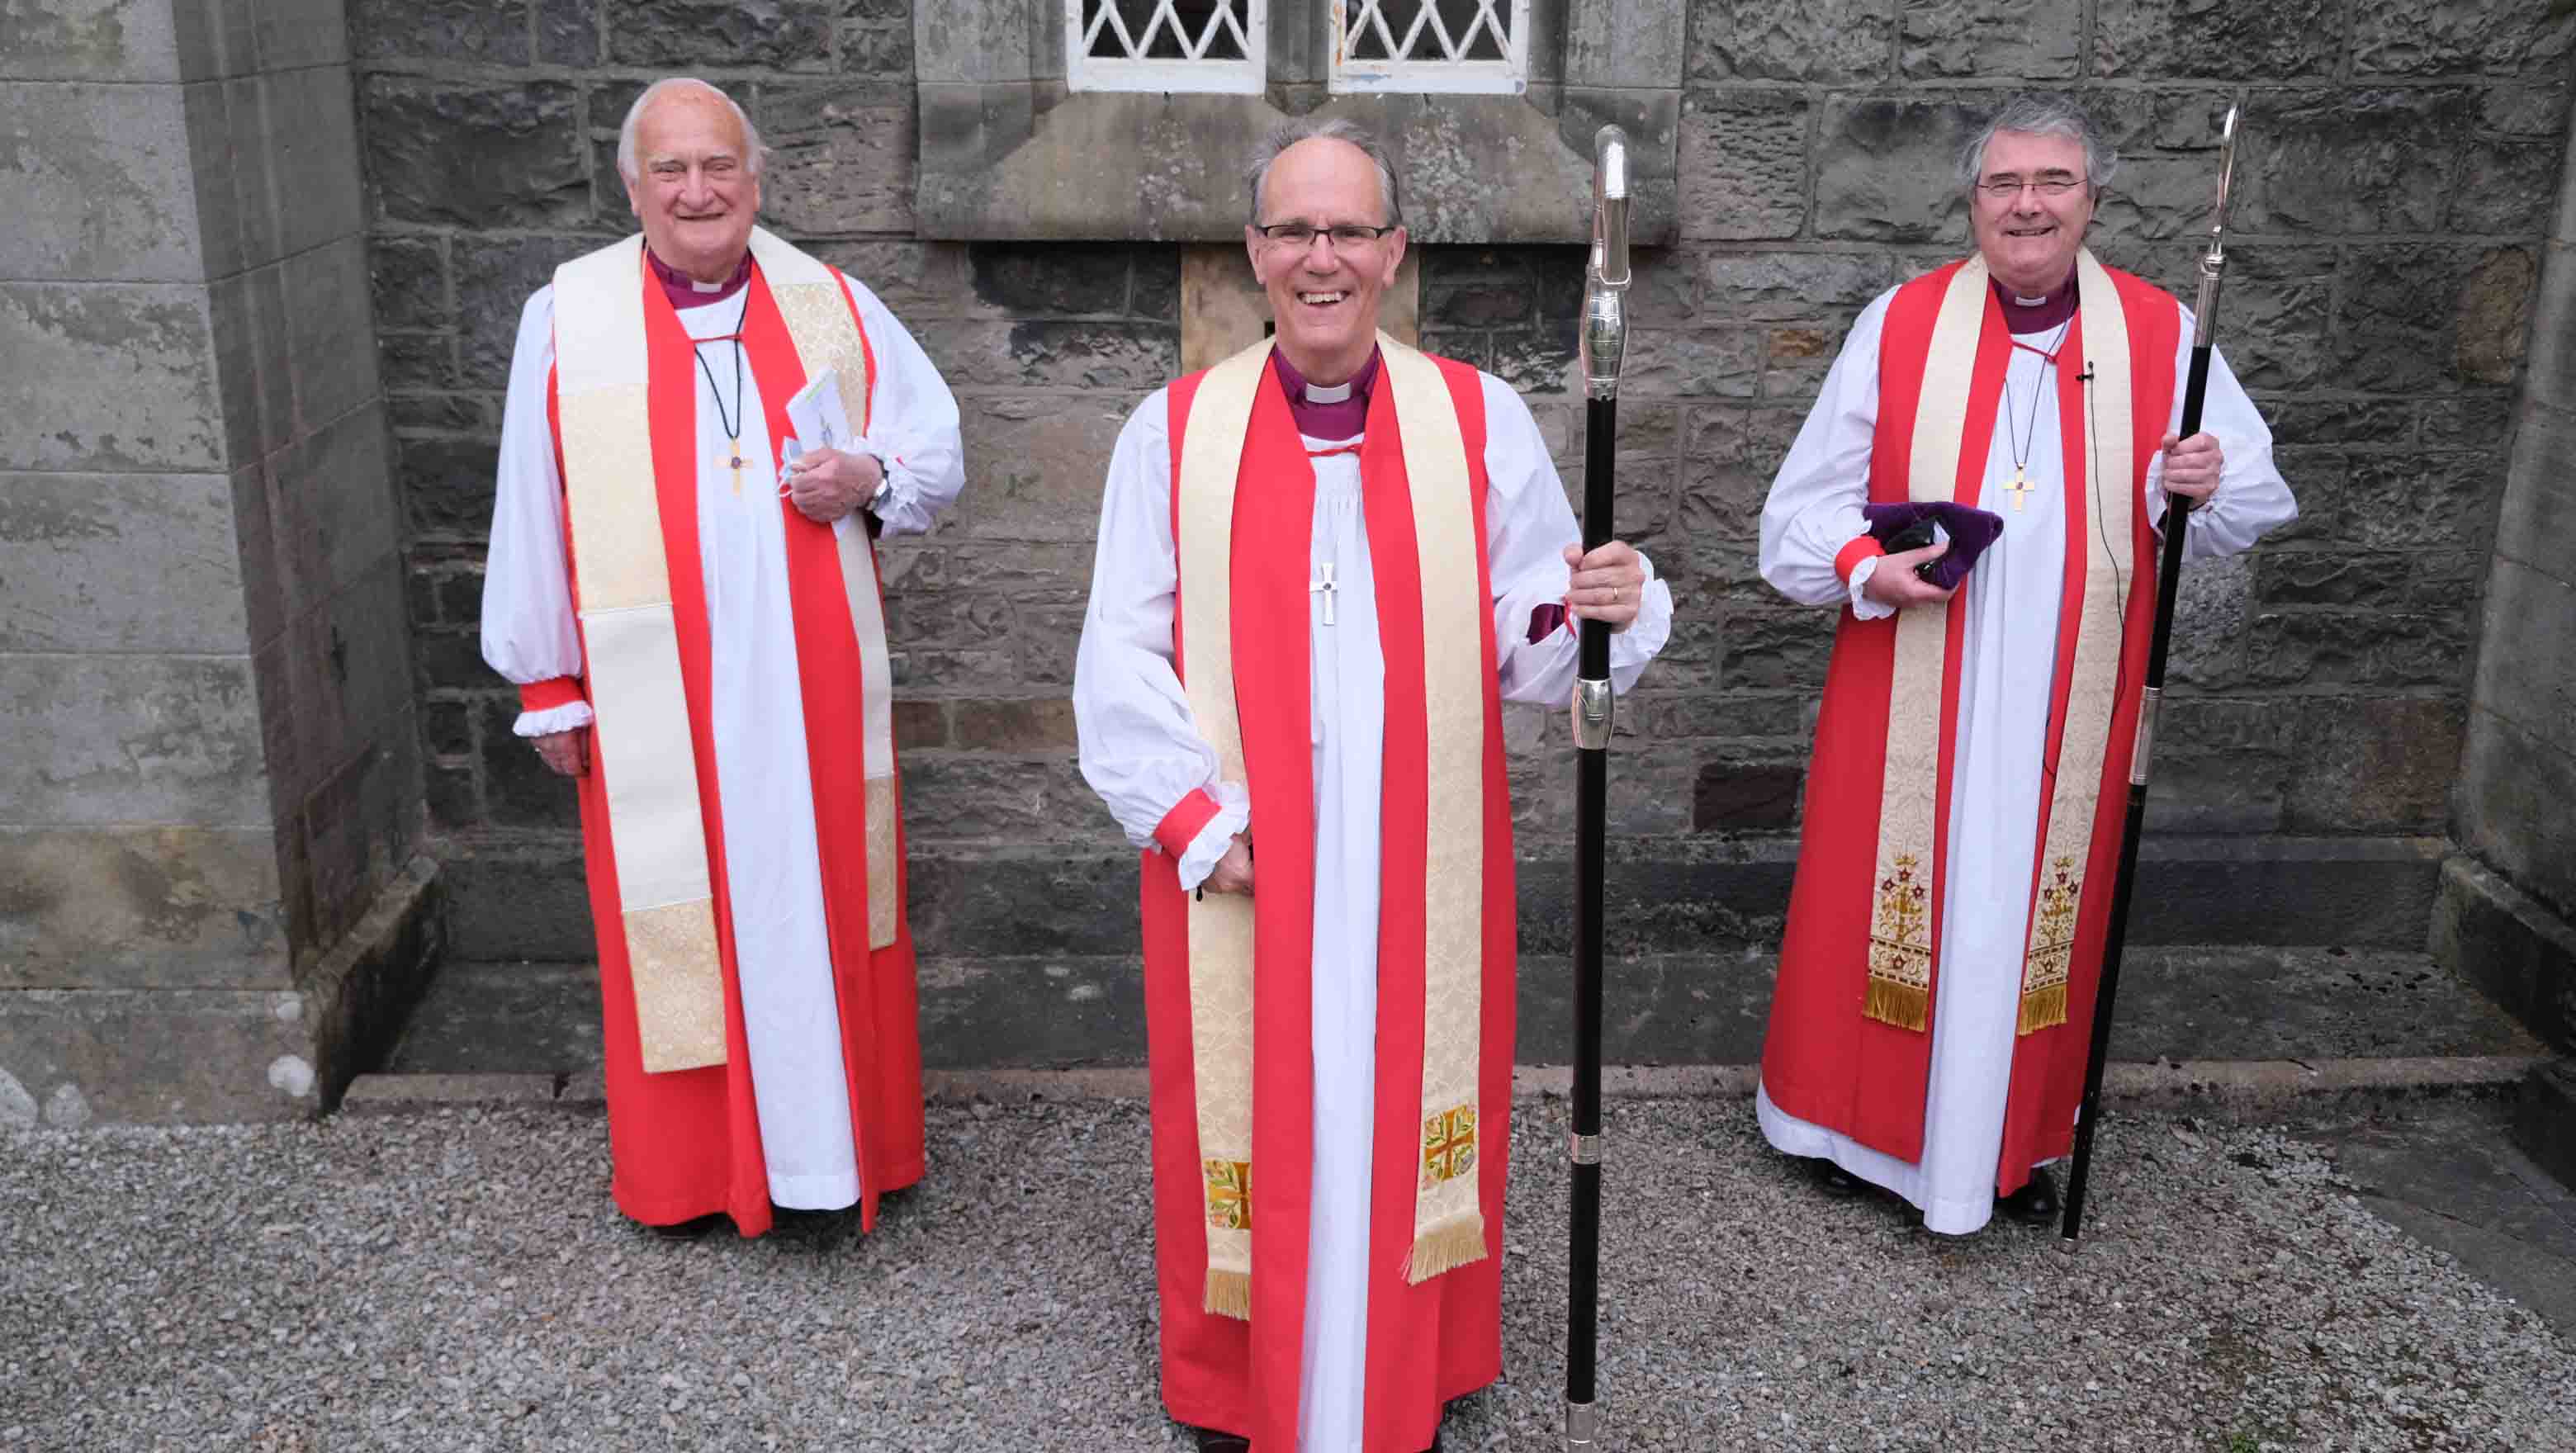 The new Church of Ireland Bishop of Clogher, the Right Revd Dr Ian Ellis (centre), at his Service of Consecration in St Macartin's Cathedral, Enniskillen, on Monday, 26th April, with the Right Revd Lord Eames, former Archbishop of Armagh, who preached and Archbishop John McDowell, who led the service.